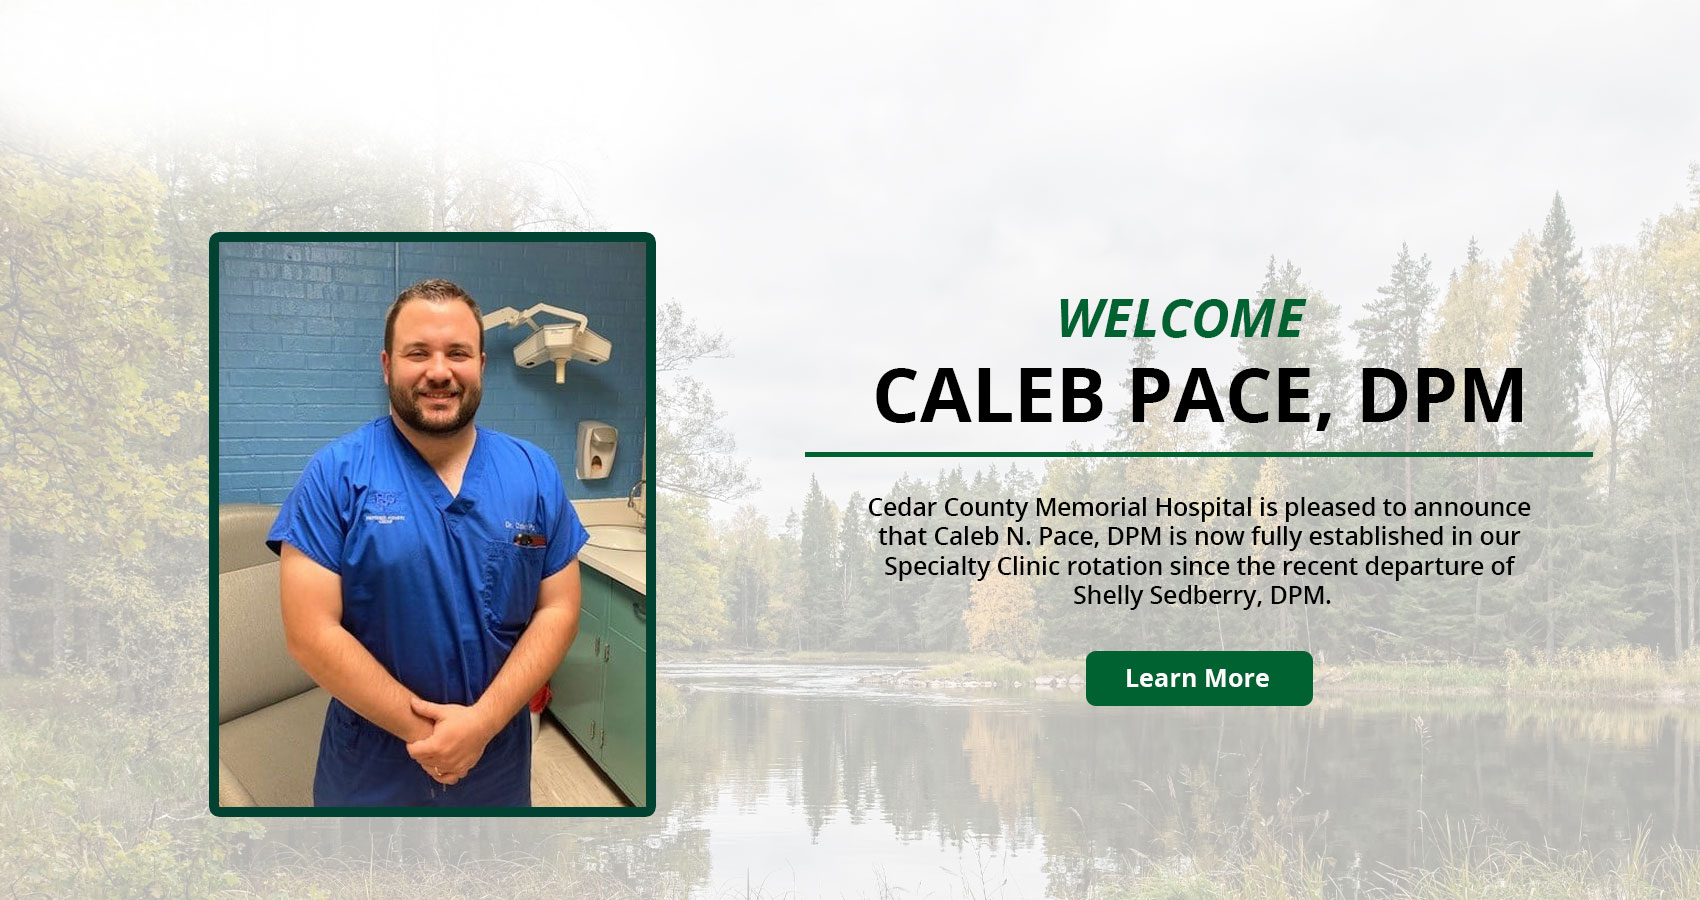 Banner picture of Caleb N. Pace, (DPM) smiling. There is a faded background of trees, water, and rocks. Banner says:

Cedar County Memorial Hospital is pleased to announce that Caleb N. Pace, DPM is now fully established in our Speciality Clinic rotation since the recent departure of Shelly Sedberry, DPM.

Learn More